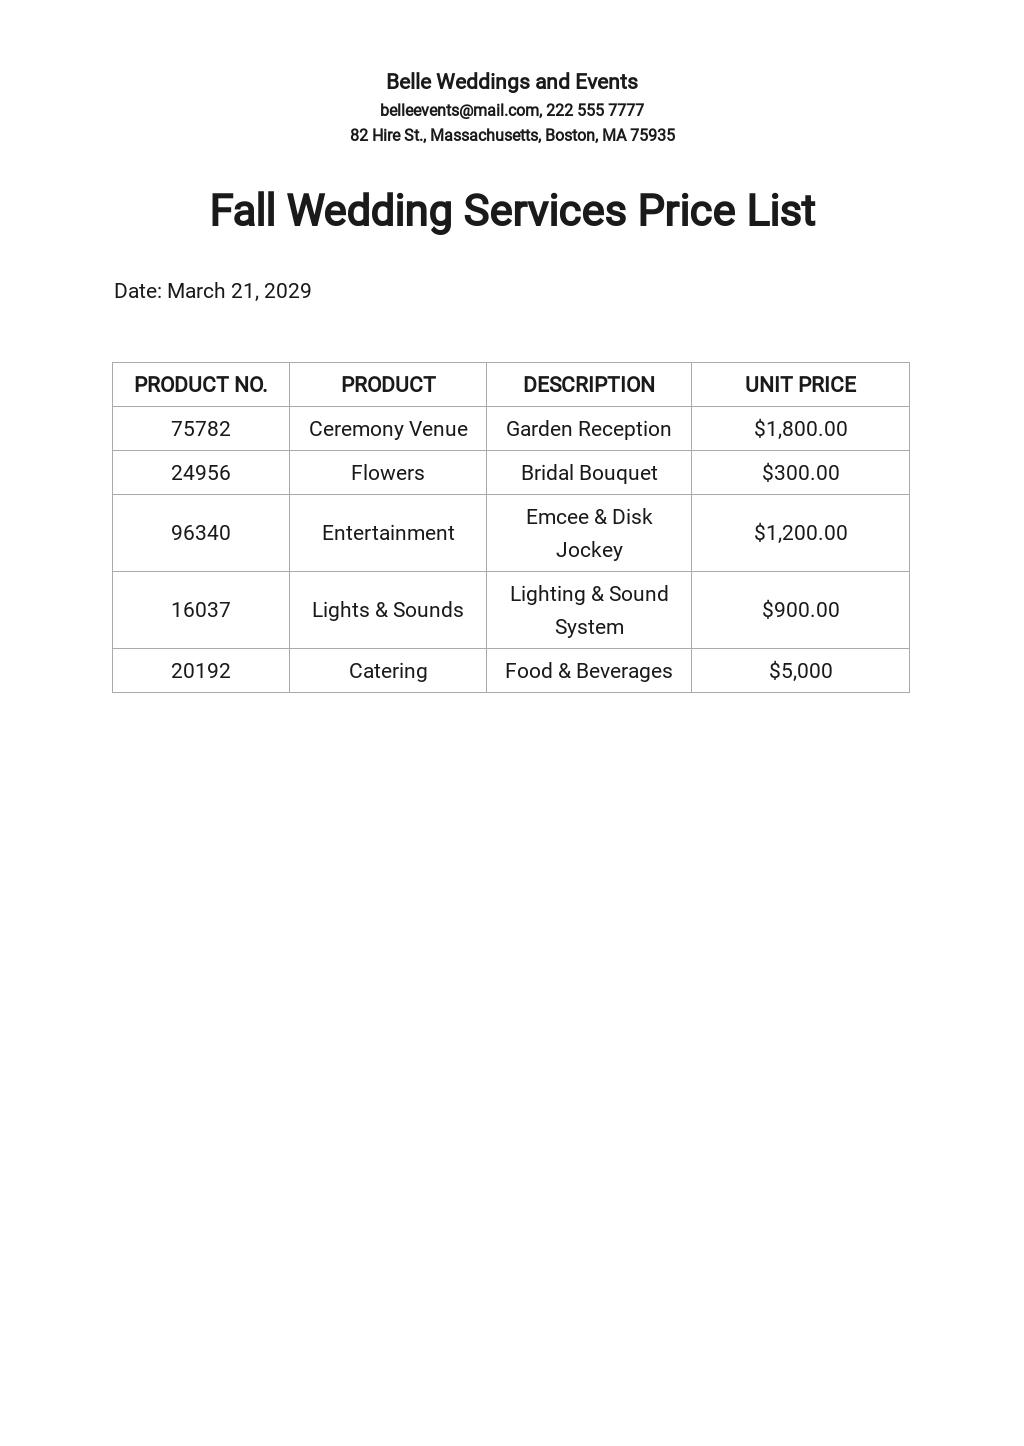 Fall Wedding Services Price List Template.jpe